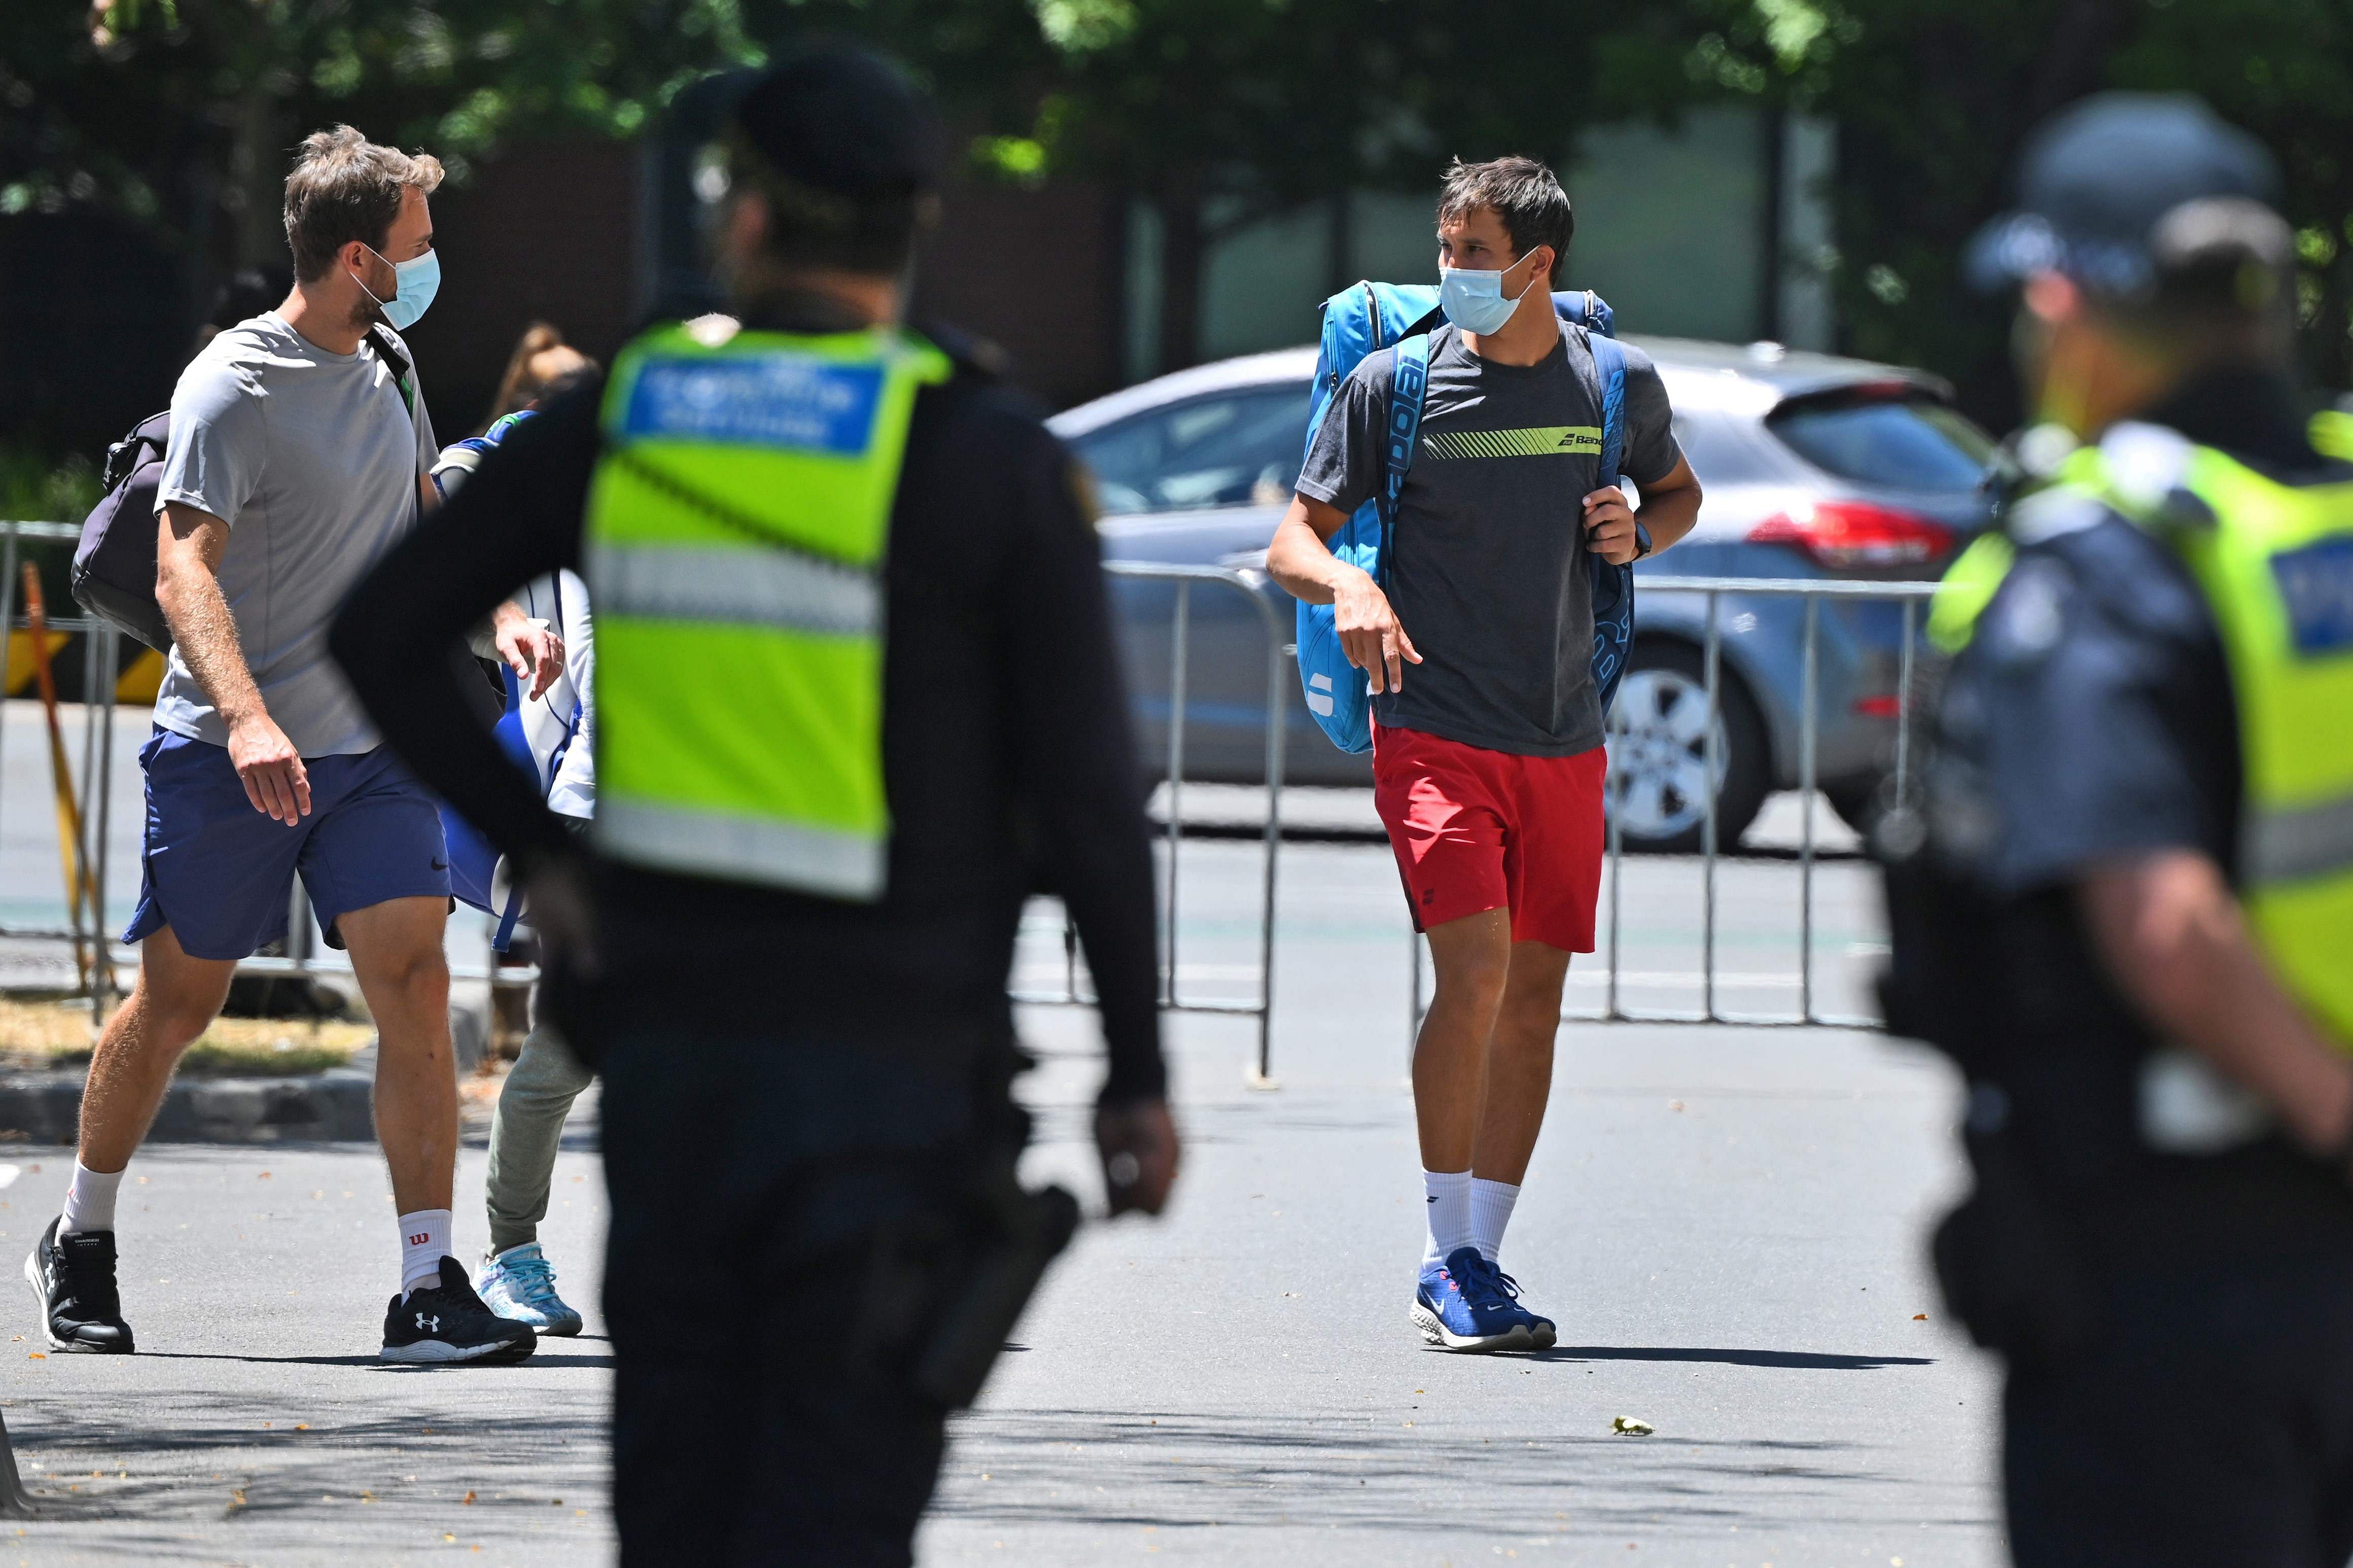 Tennis players return to their hotel after a practice session. Credit: AFP Photo